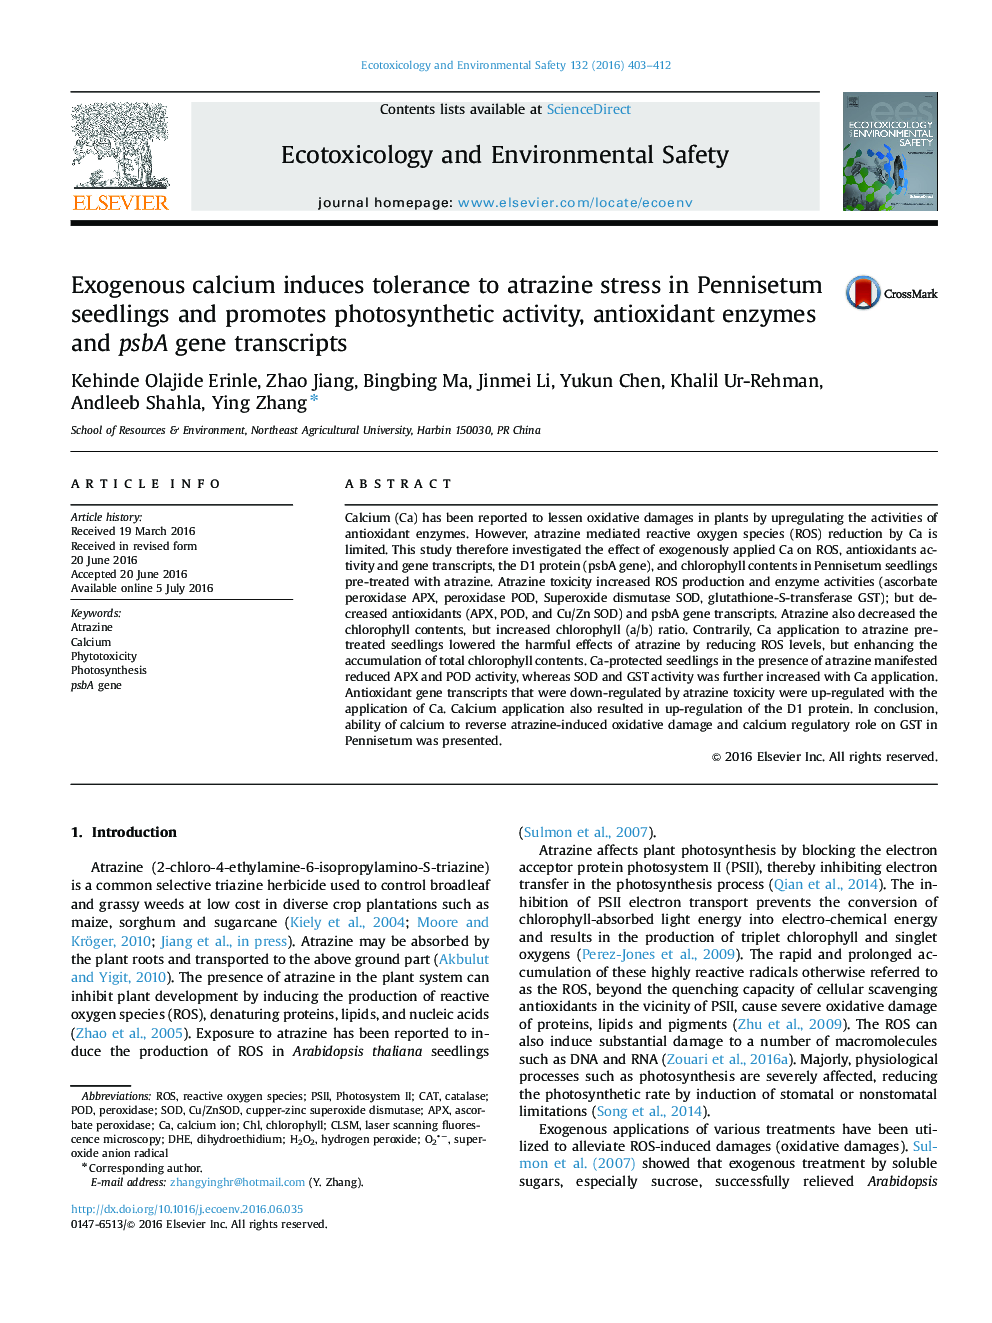 Exogenous calcium induces tolerance to atrazine stress in Pennisetum seedlings and promotes photosynthetic activity, antioxidant enzymes and psbA gene transcripts